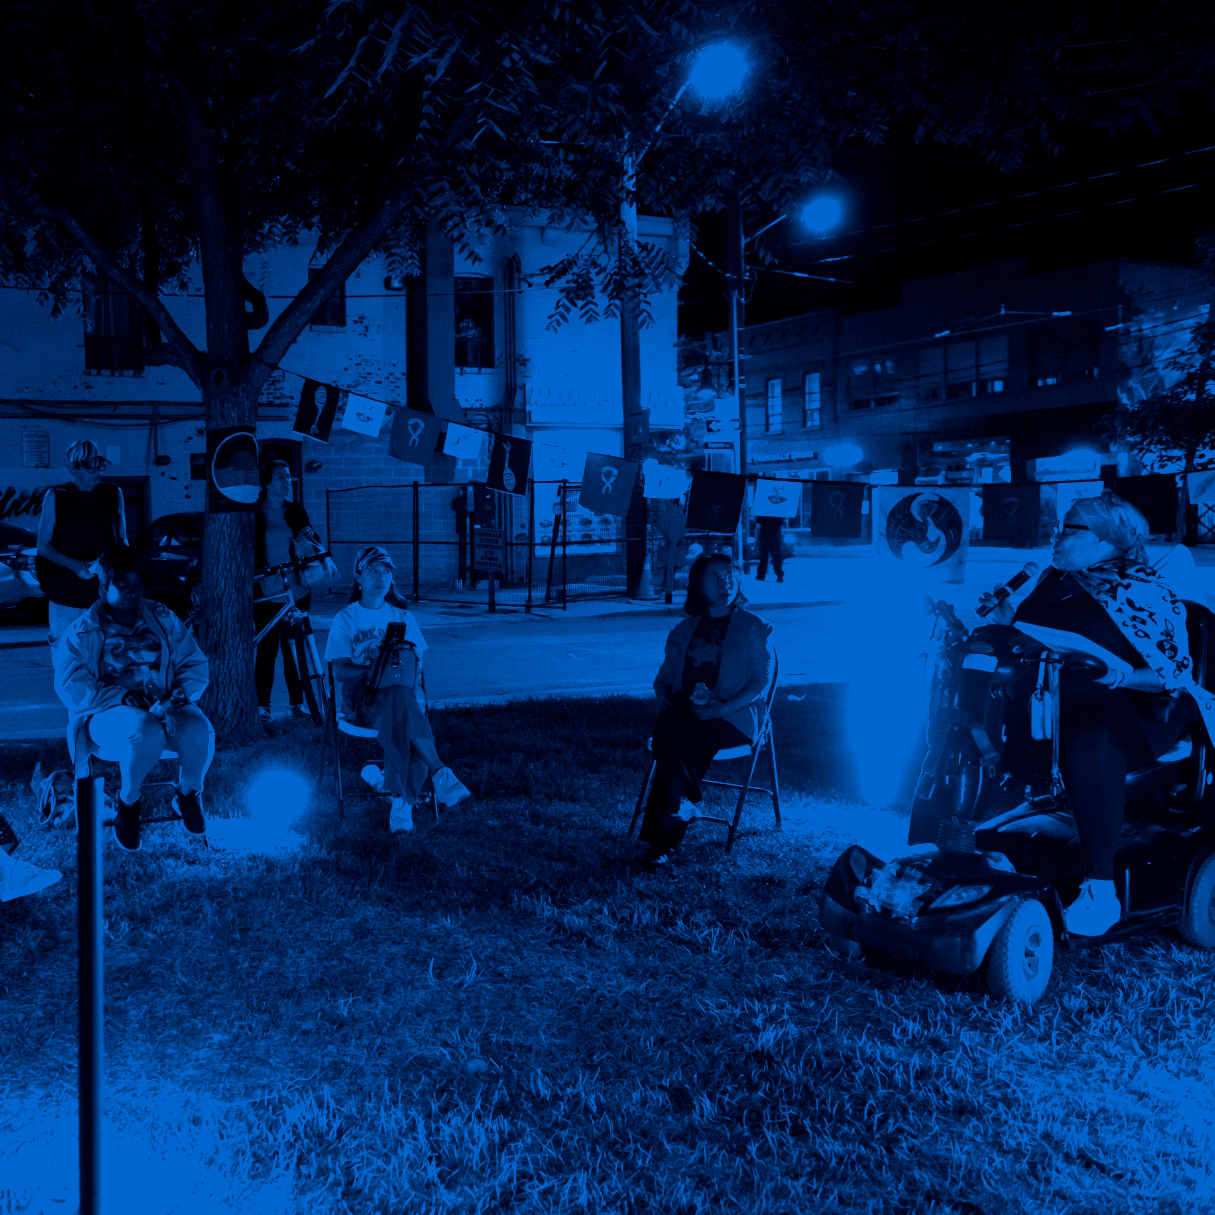 Five performers in a street-side park sit in semi-circle, lit by a purple glow. One of them is in a motorized chair and speaking into a microphone. A line of flags hangs behind them.